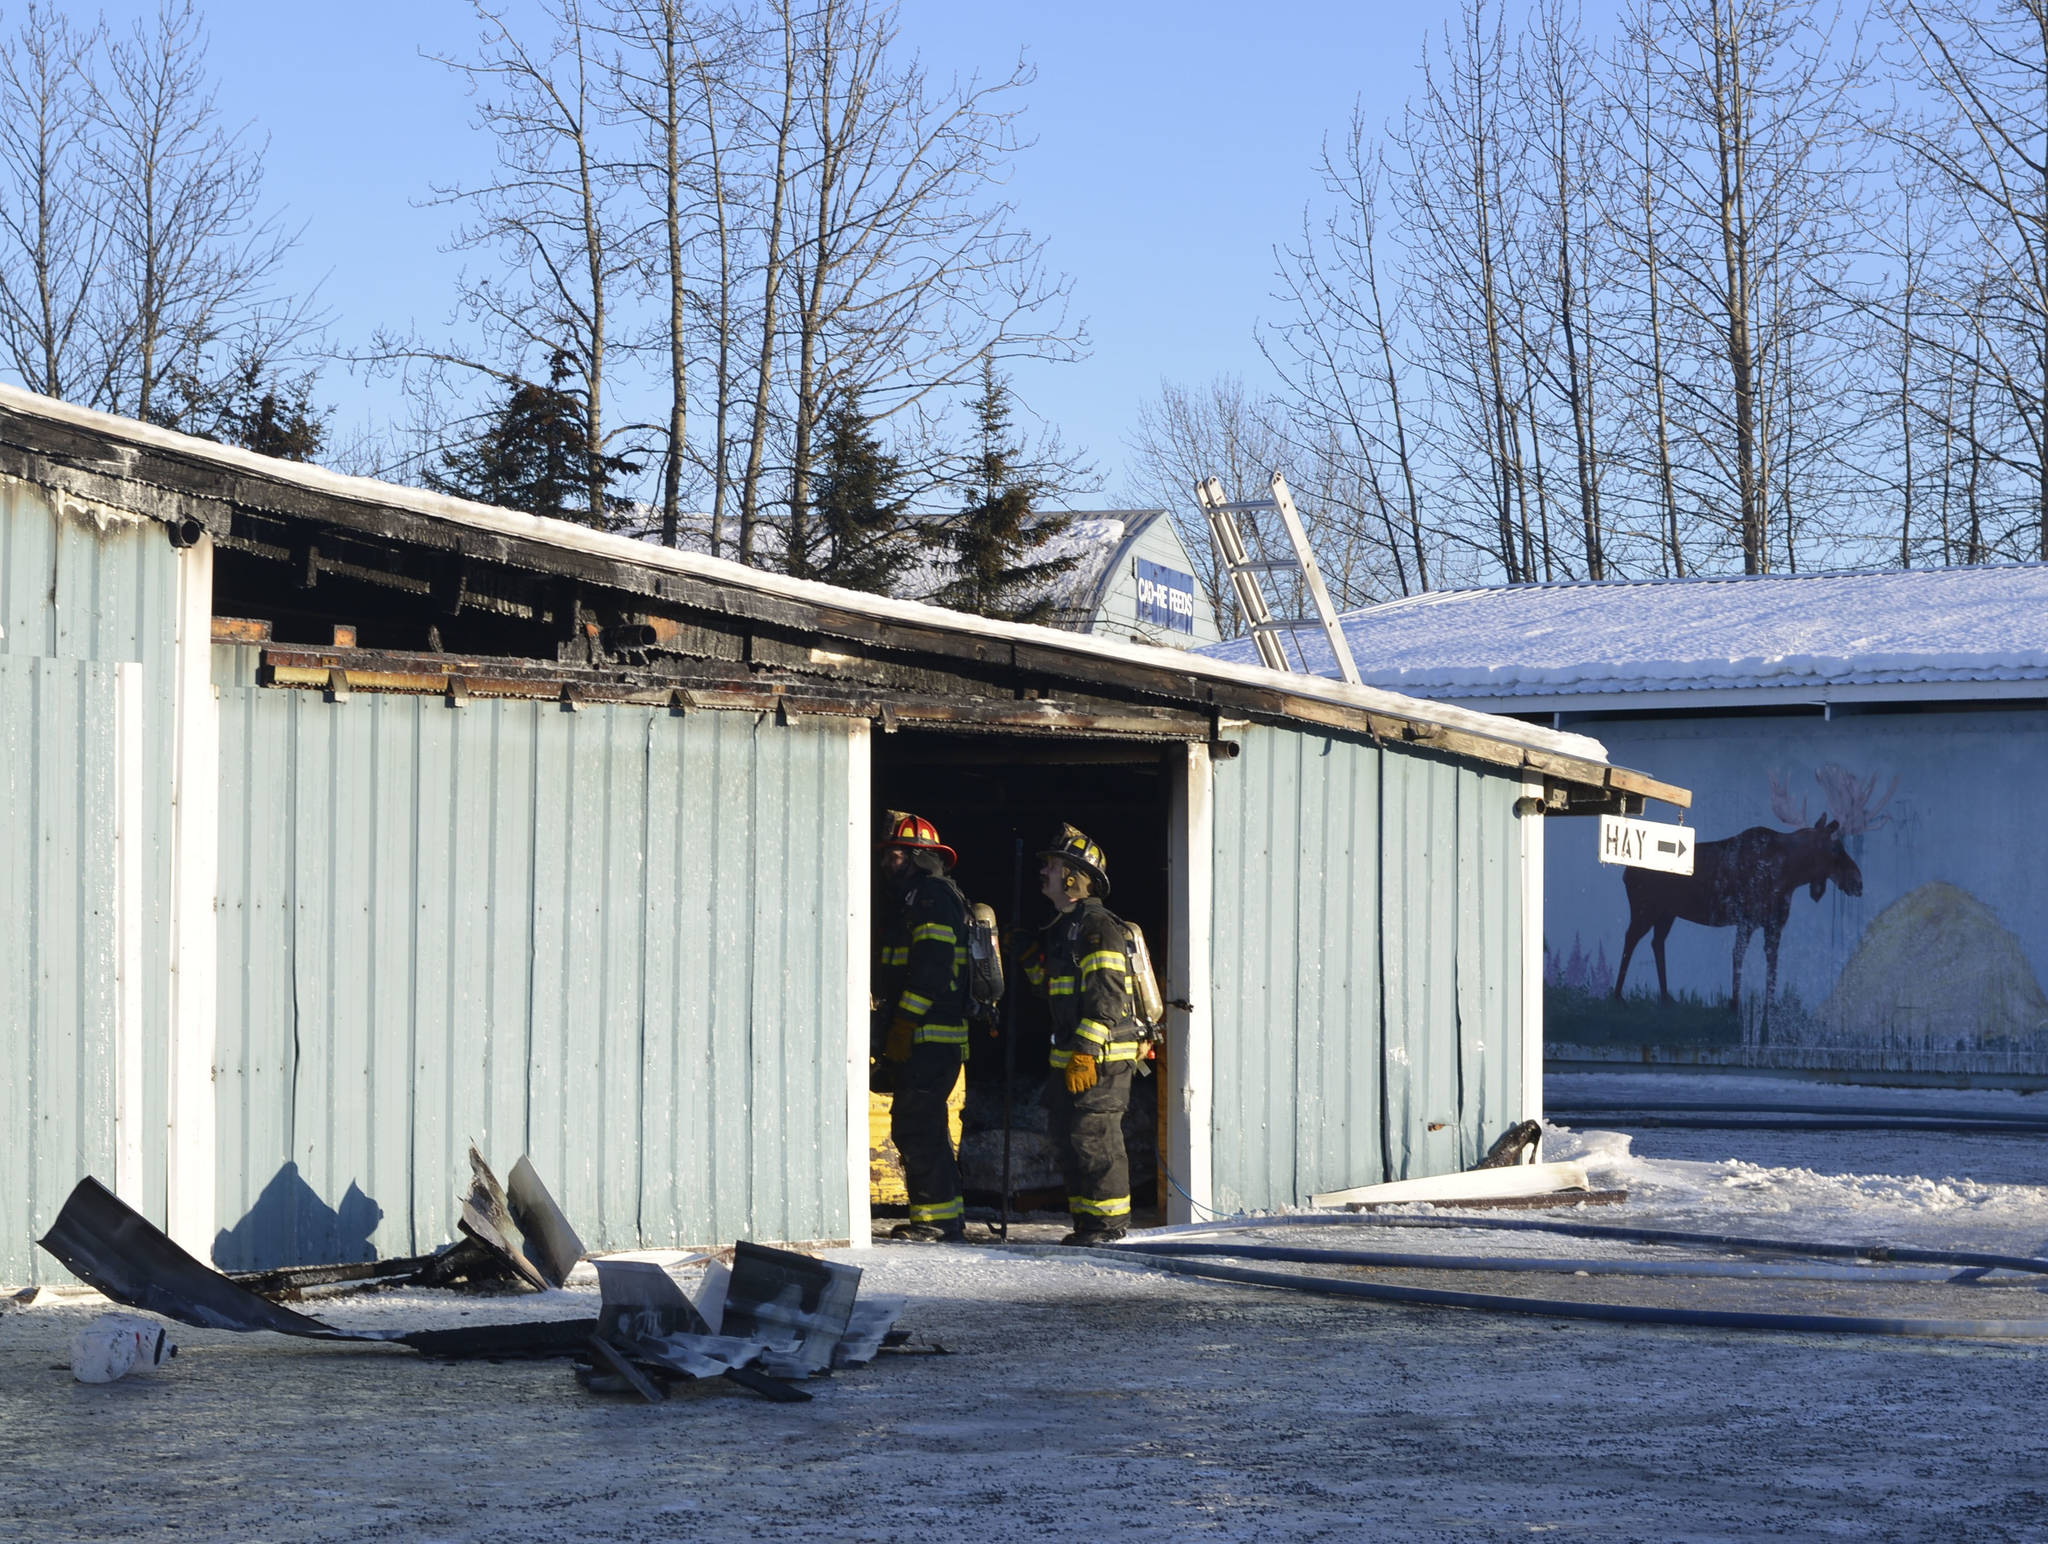 Central Emergency Services responded to a fire at Cad-Re Feeds in Soldotna on Thursday, March 16, 2017 in addition to a second fire that took place on Swanson River Road earlier that evening. (Kat Sorensen/Peninsula Clarion)